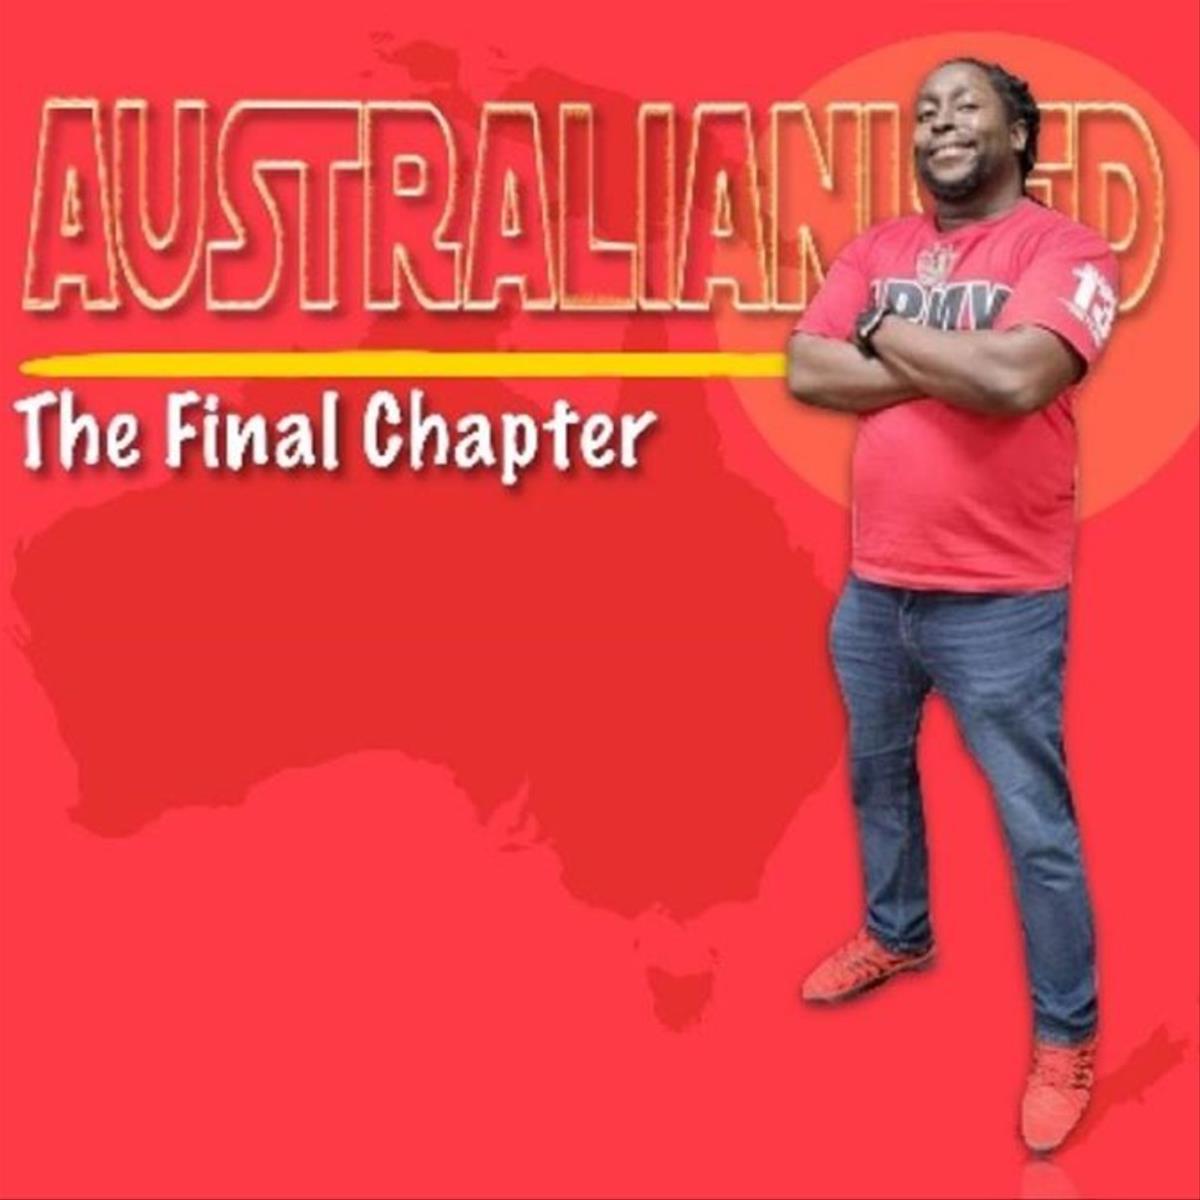 Australianised - The Final Chapter